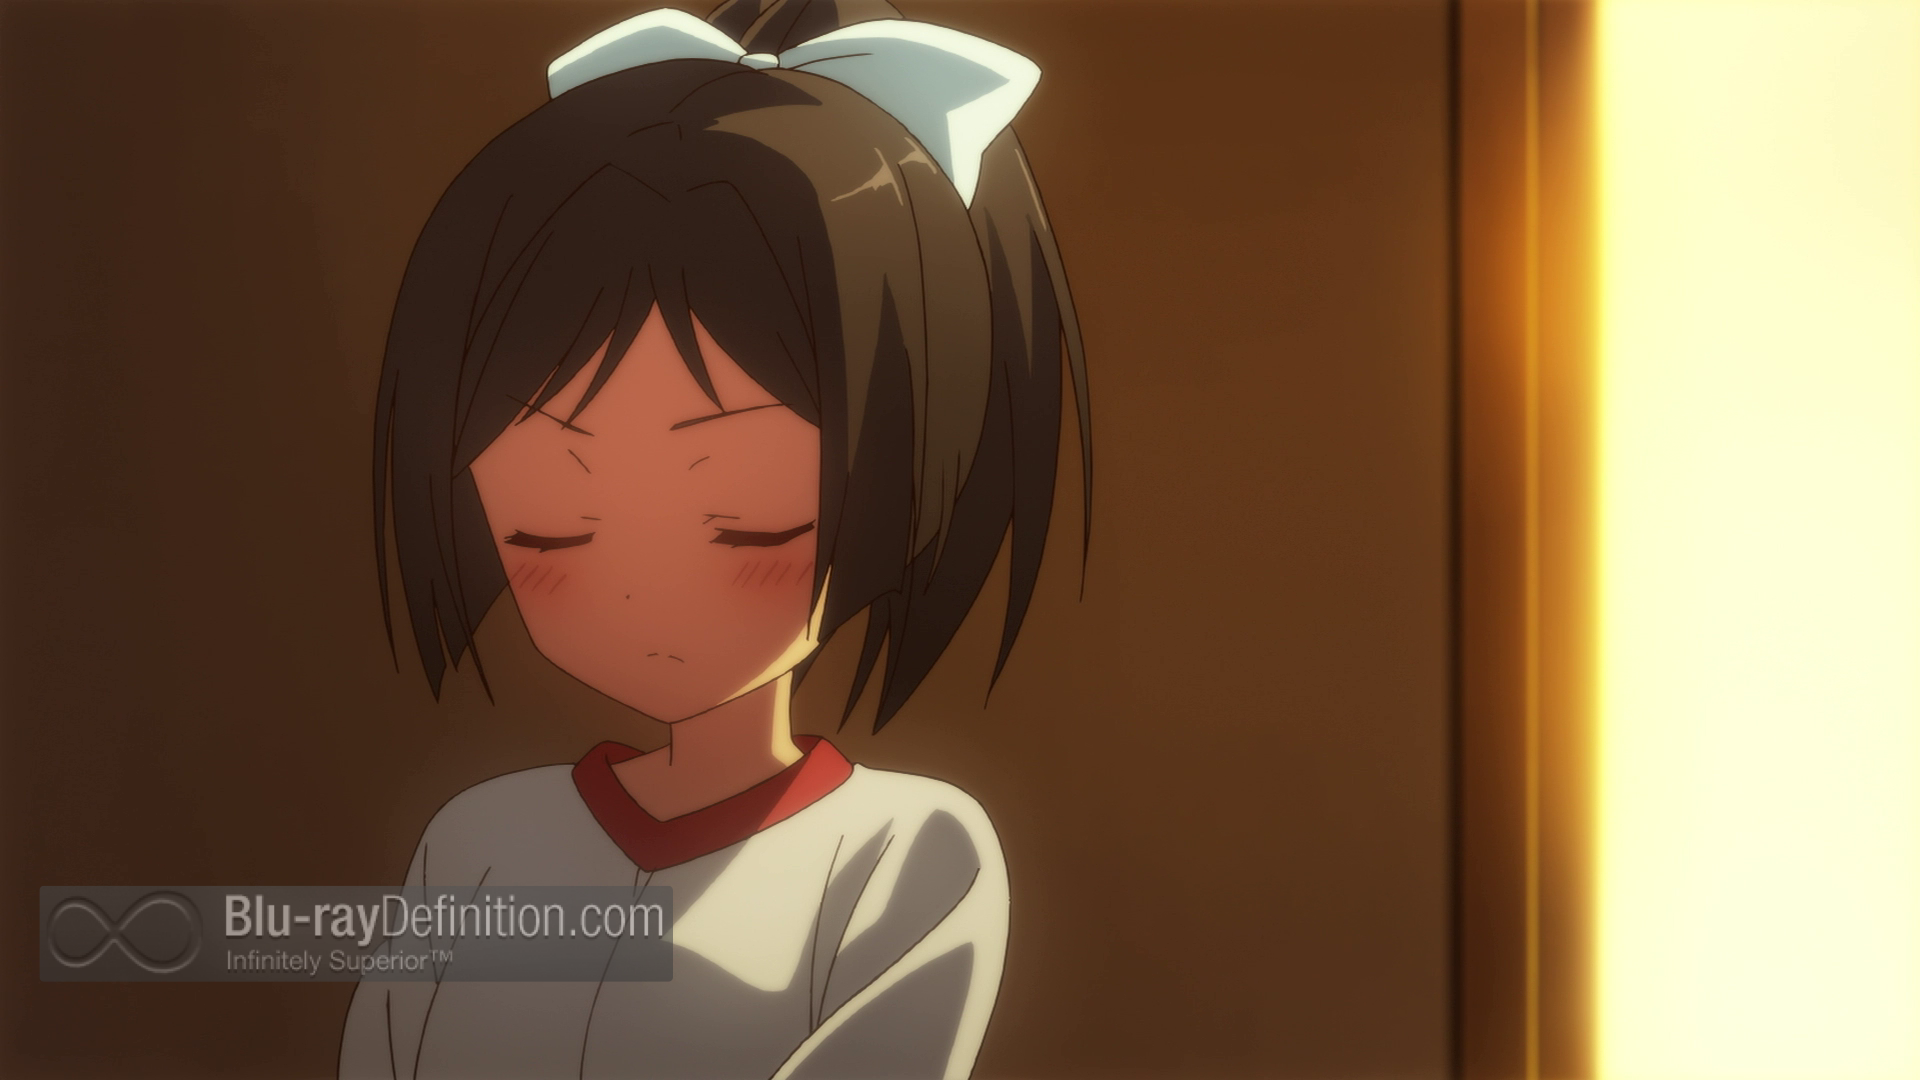 Love, Chunibyo and Other Delusions: Ultimate Collection Blu-ray